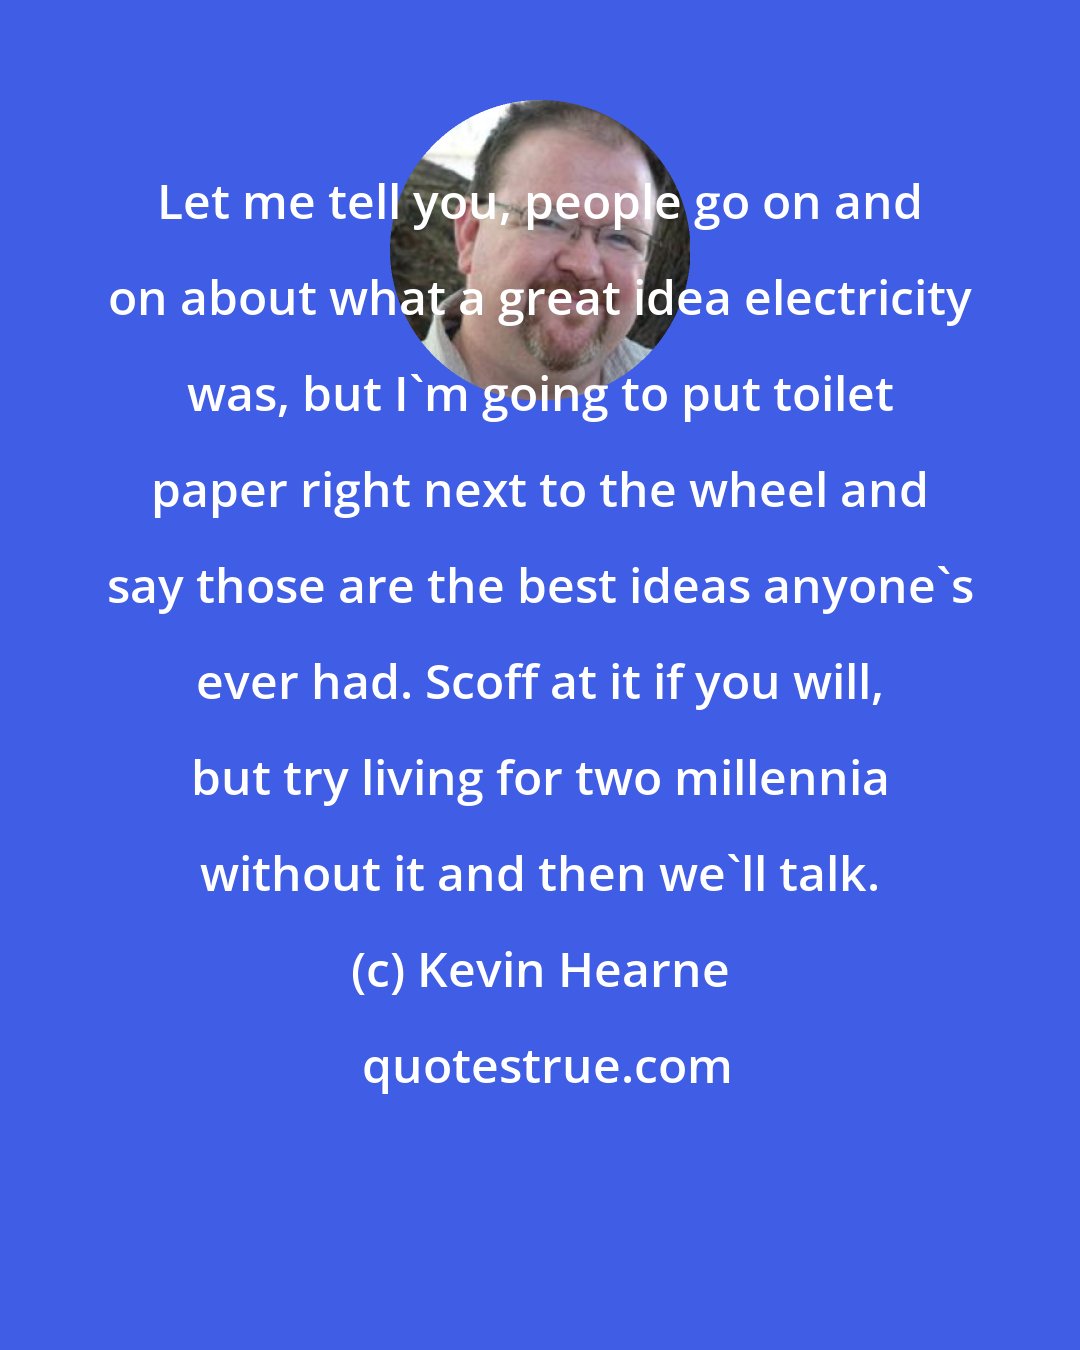 Kevin Hearne: Let me tell you, people go on and on about what a great idea electricity was, but I'm going to put toilet paper right next to the wheel and say those are the best ideas anyone's ever had. Scoff at it if you will, but try living for two millennia without it and then we'll talk.